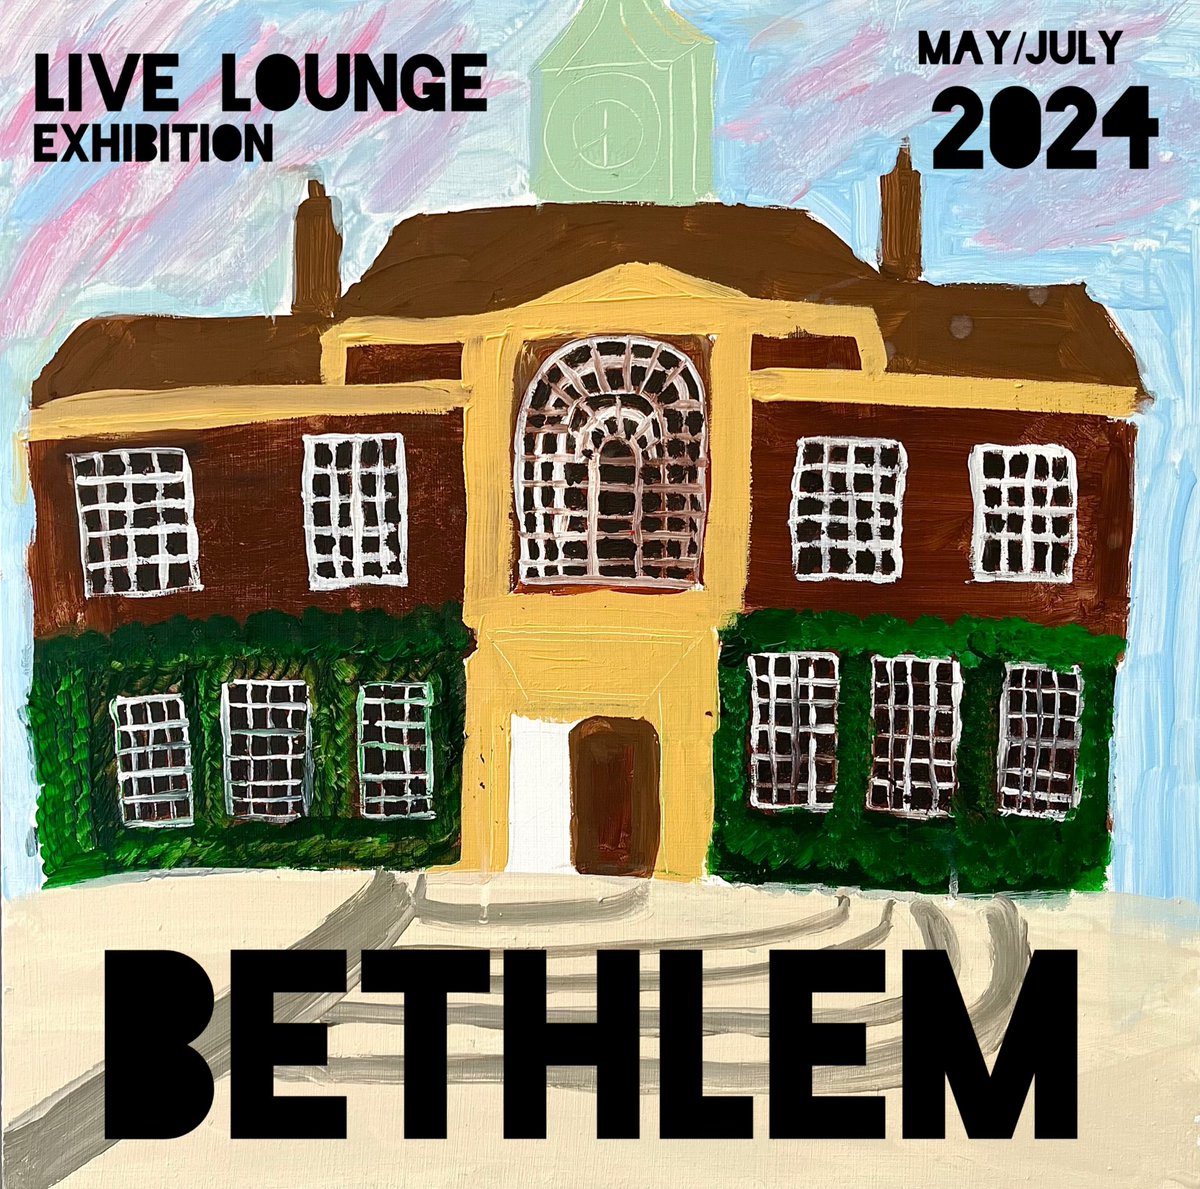 Bethlem Gallery announces our new exhibition: Bethlem Live Lounge. Curated by @chunkymark, this is not a typical art show. We offer the community a frame, a platform, and invite you to make your own art with us. Opens 8 May 2024. #BethlemLiveLounge #music @maudsleycharity